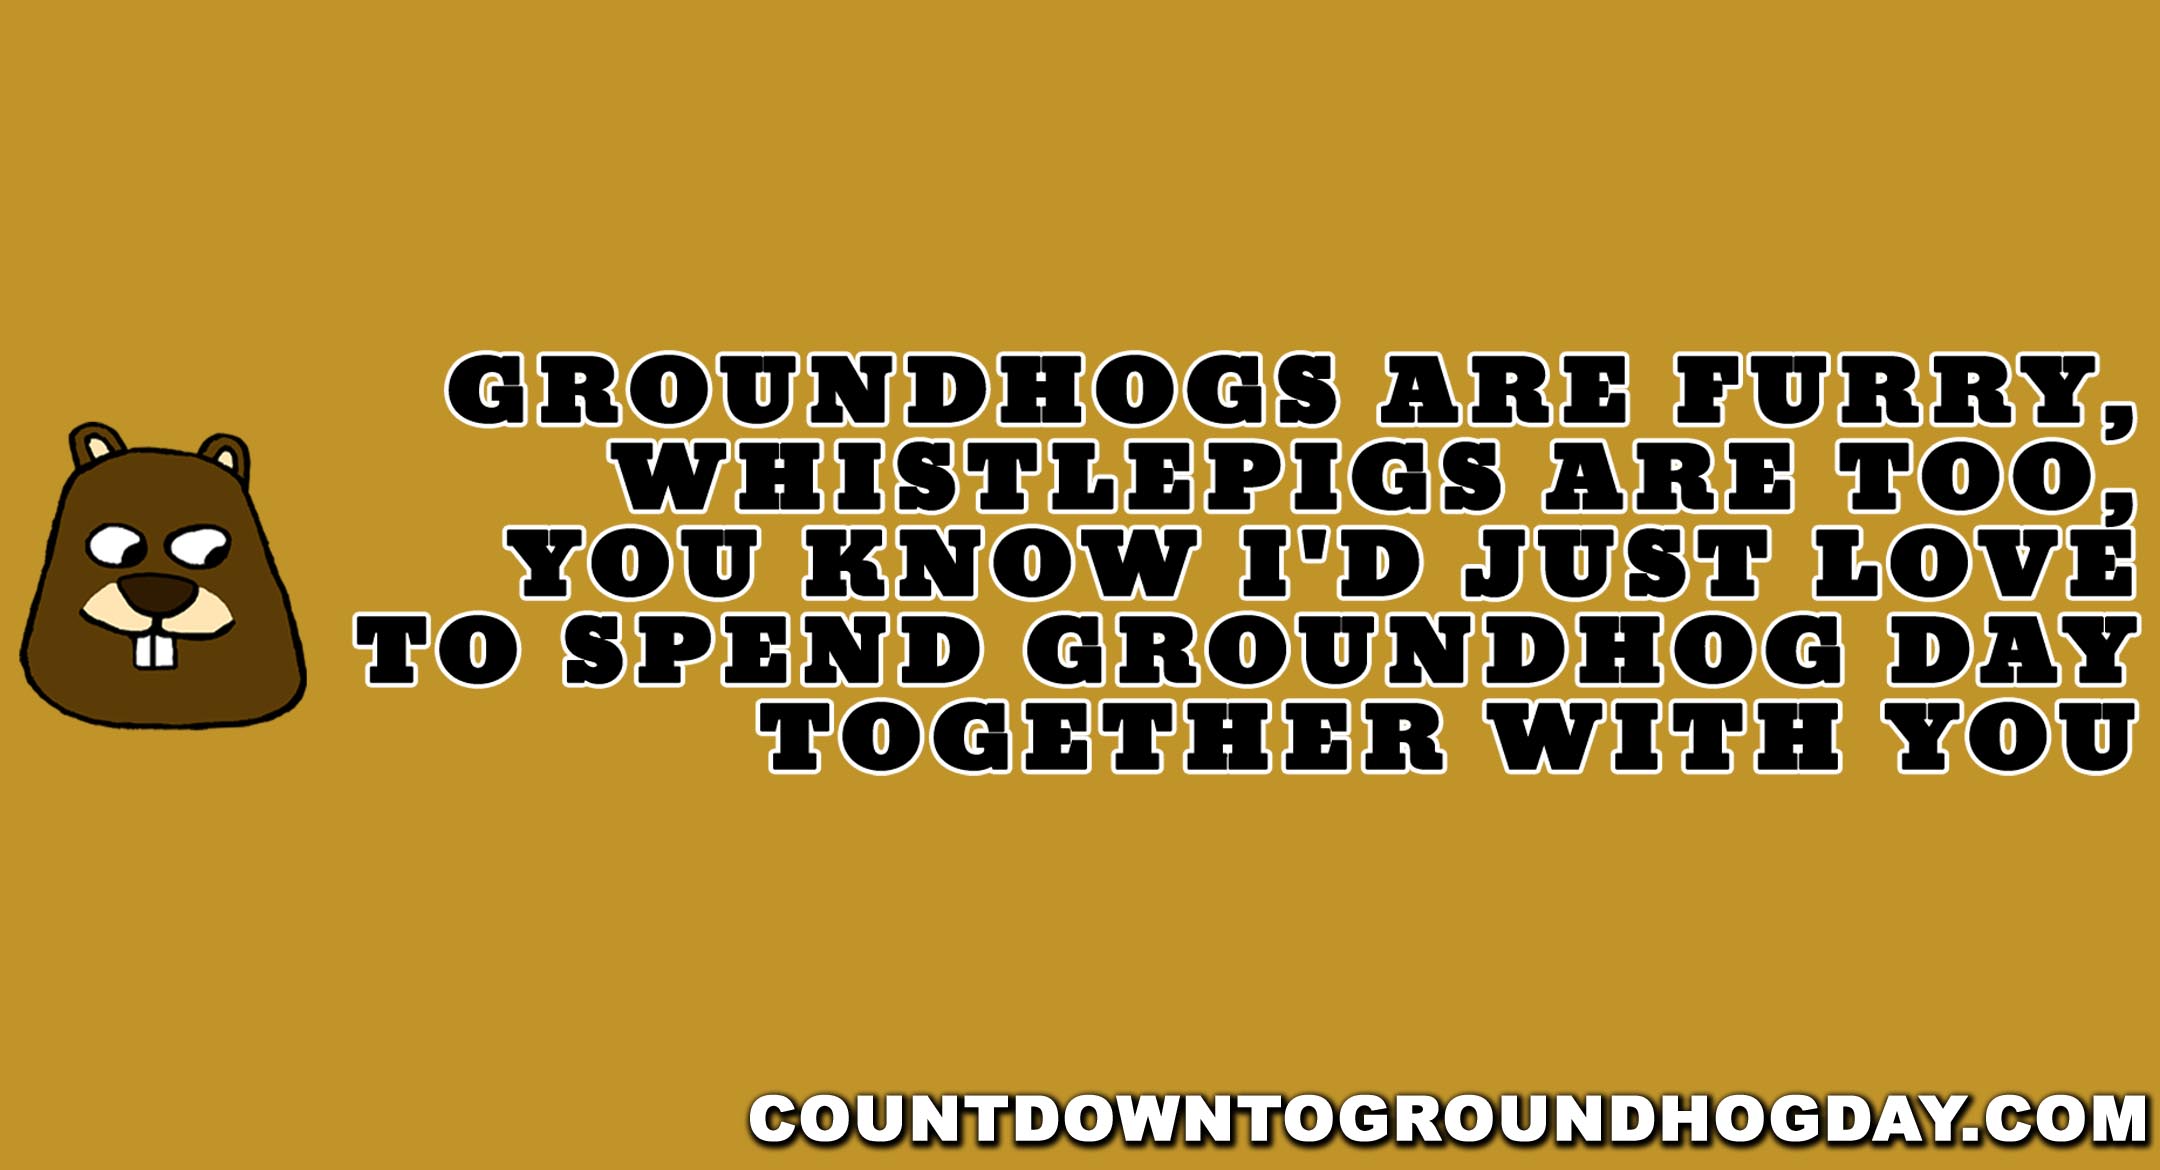 groundhogs are furry, whistlepigs are too, you know I'd just love to spend groundhog day together with you